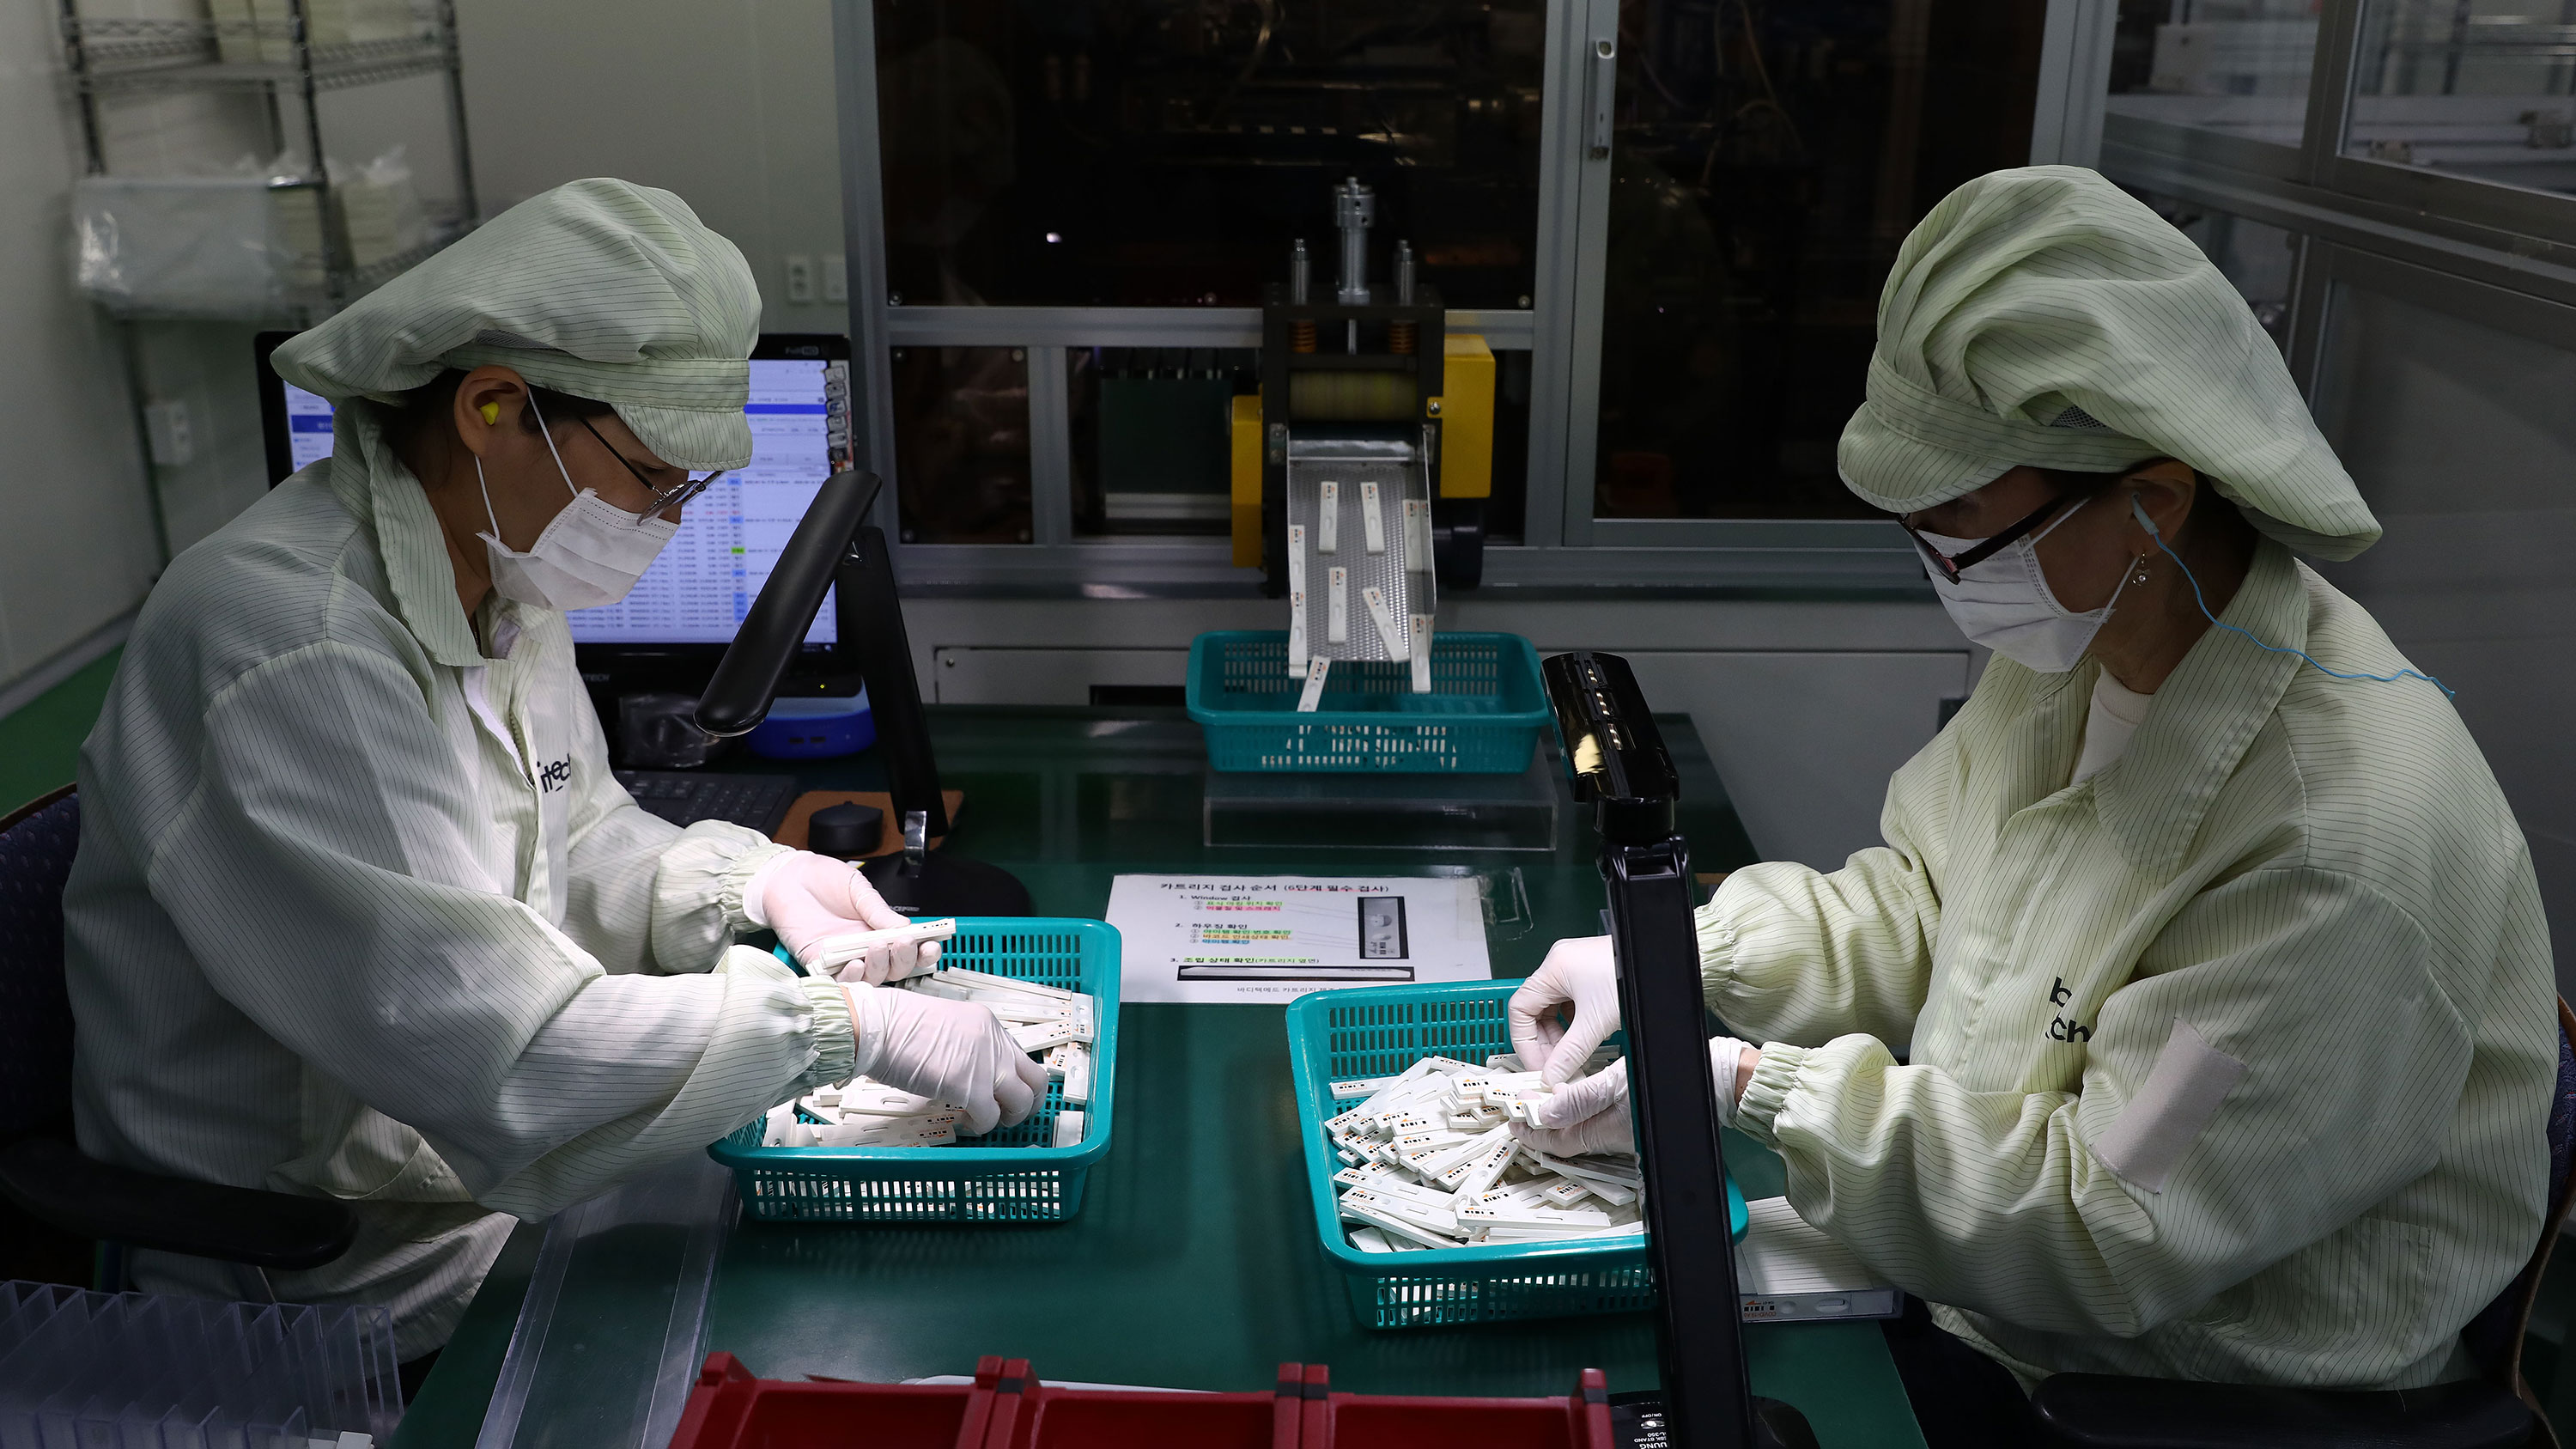 South Korea Step Up Production On COVID19 Test Kits To Contain Spread